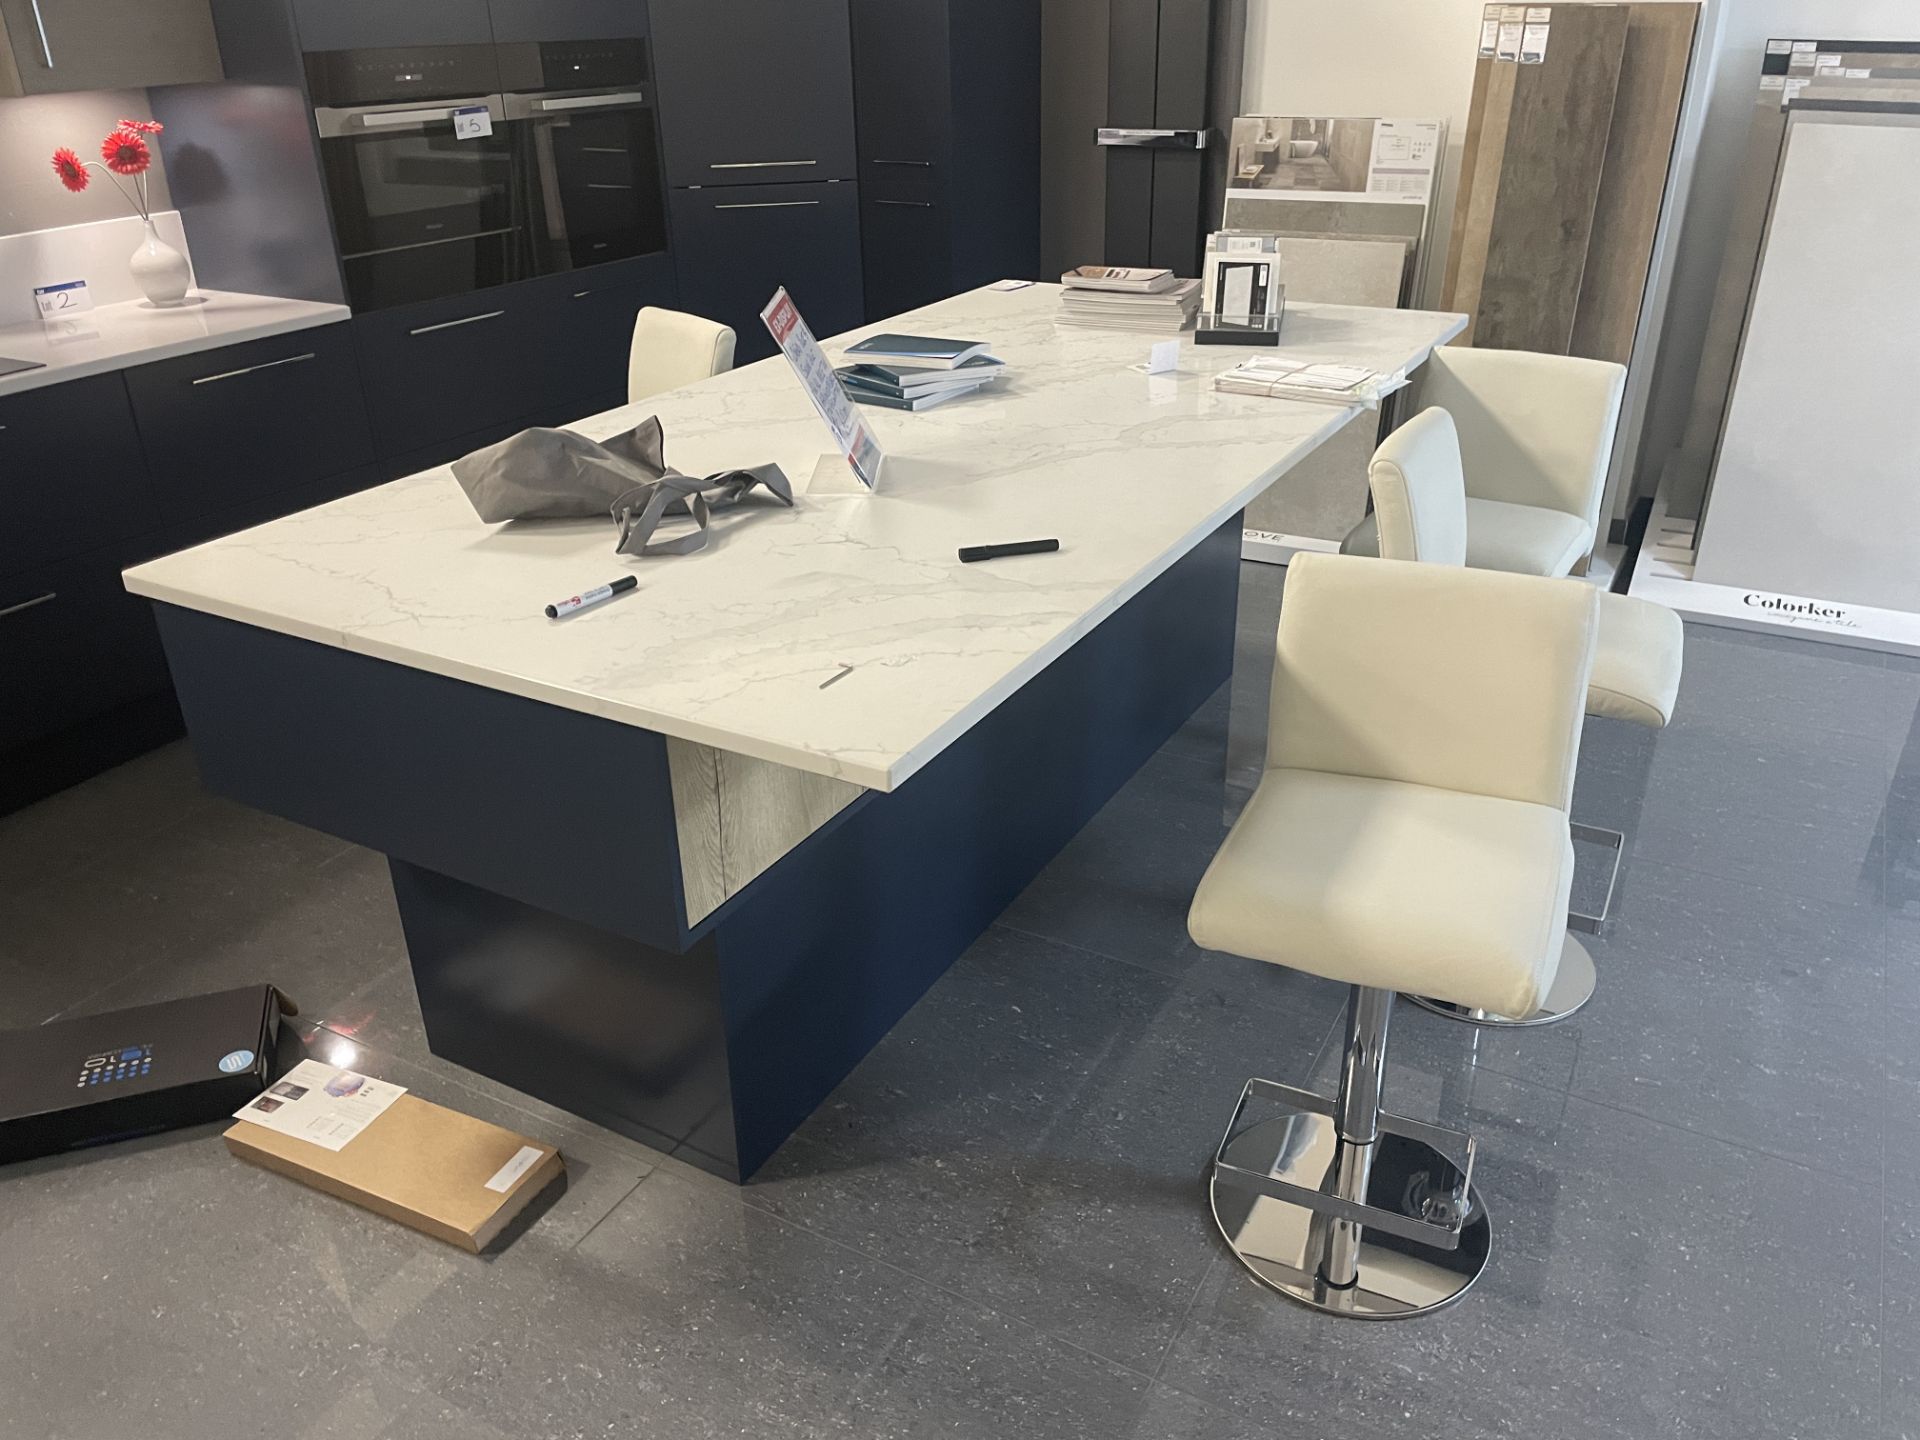 KITCHEN DINING ISLAND, approx. 2.45m x 1.2m, with four leather high chairs (please note this lot